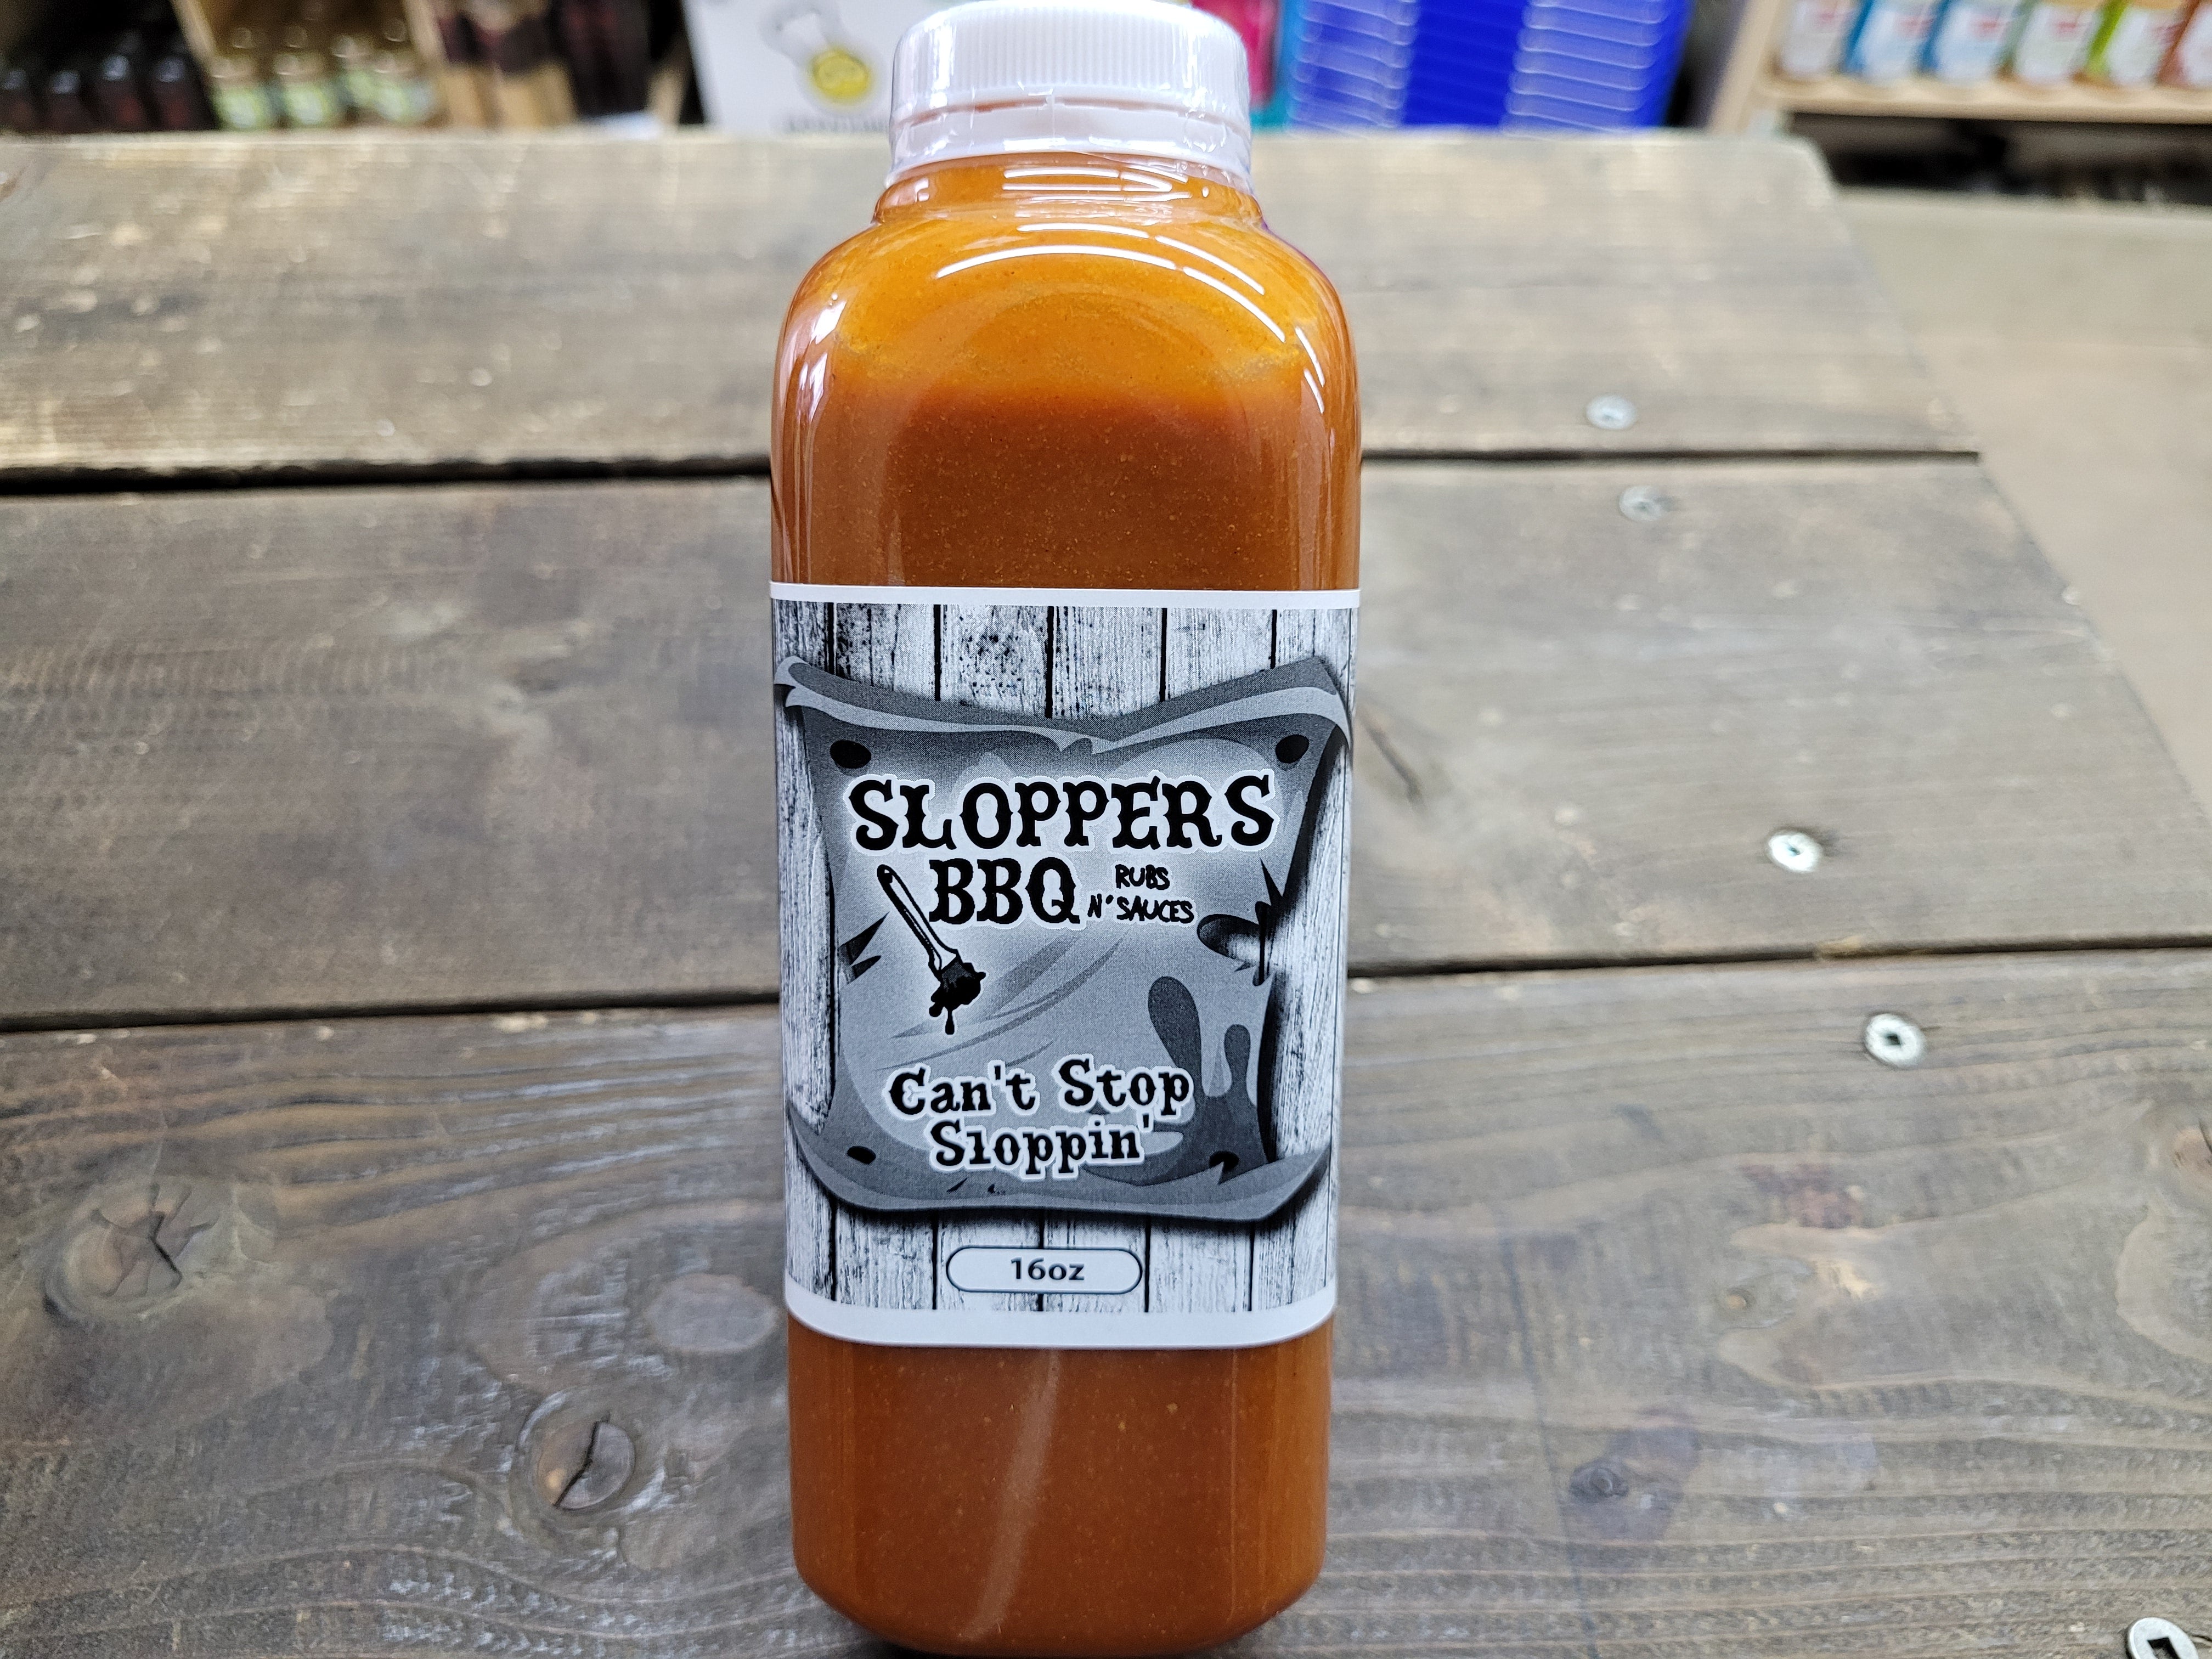 Sloppers BBQ - Can't Stop Sloppin' Sauce